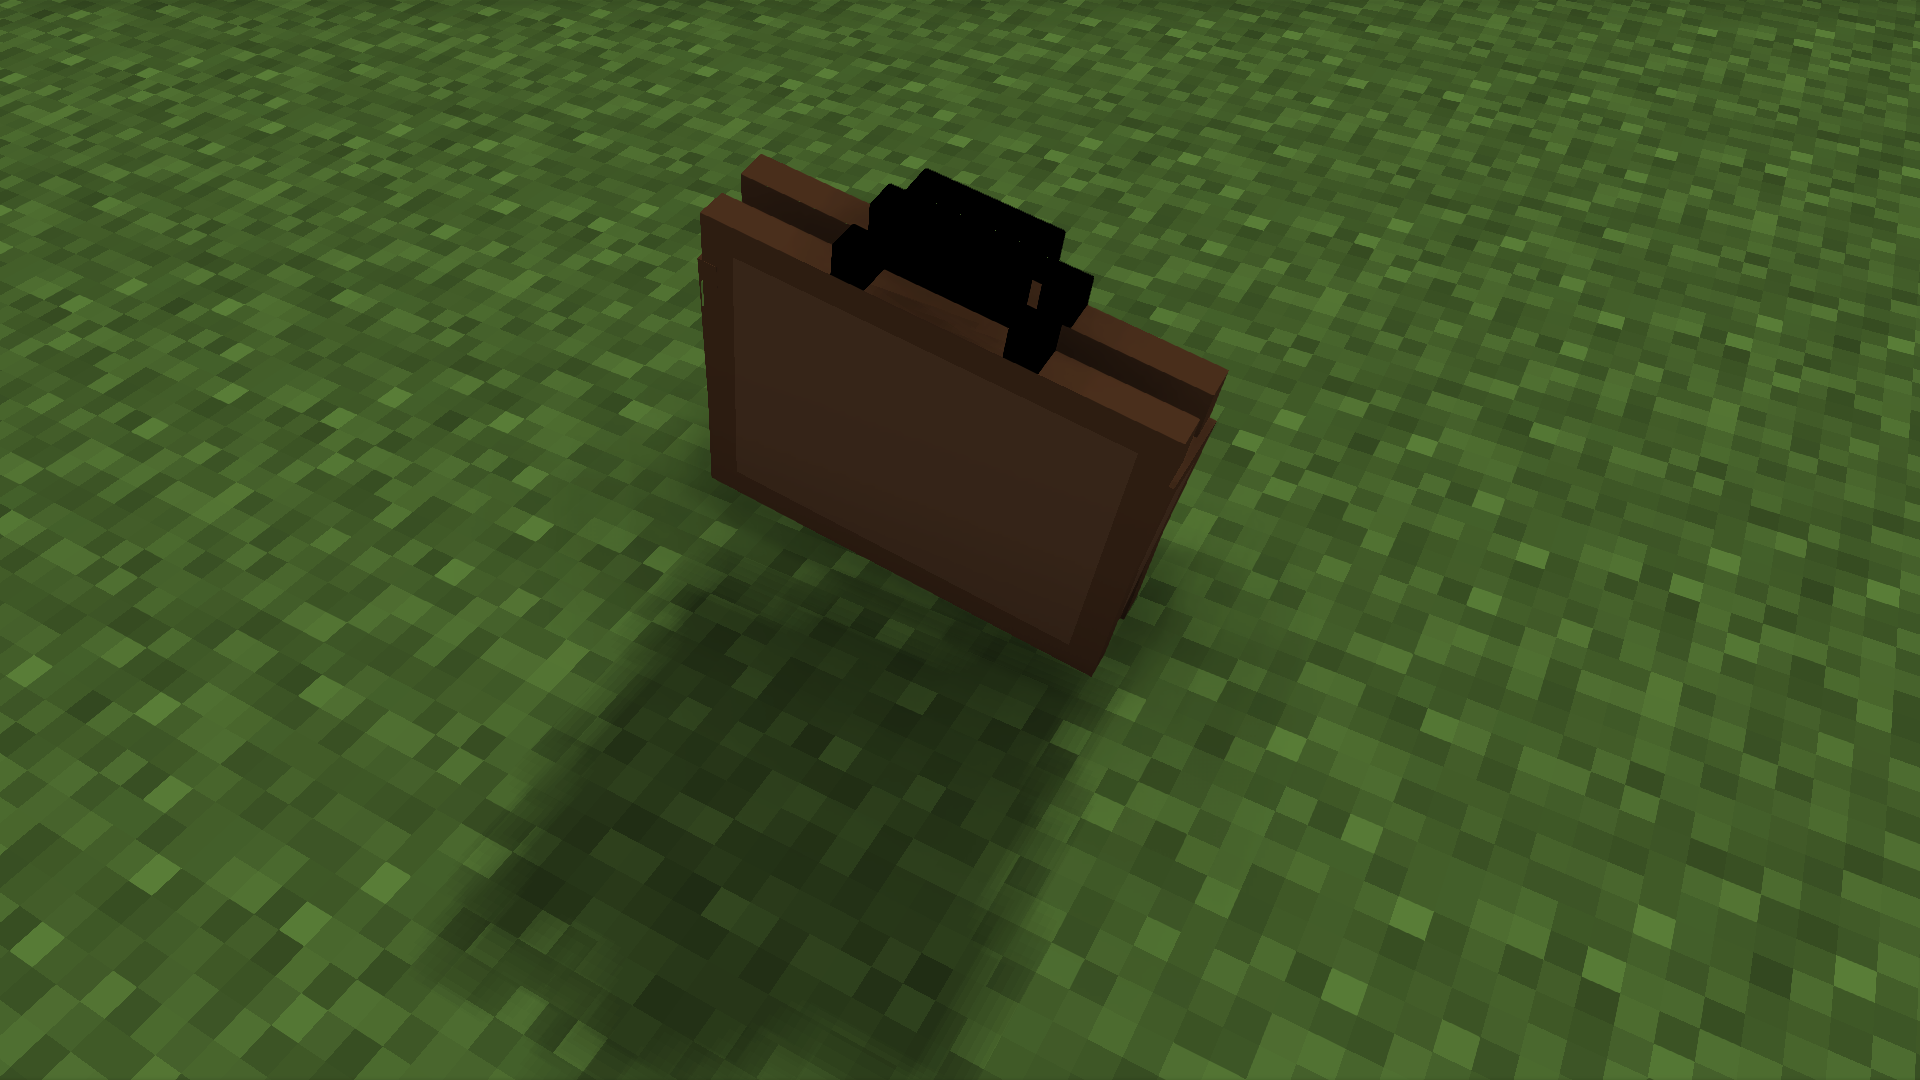 6oo_image_briefcase_2.png